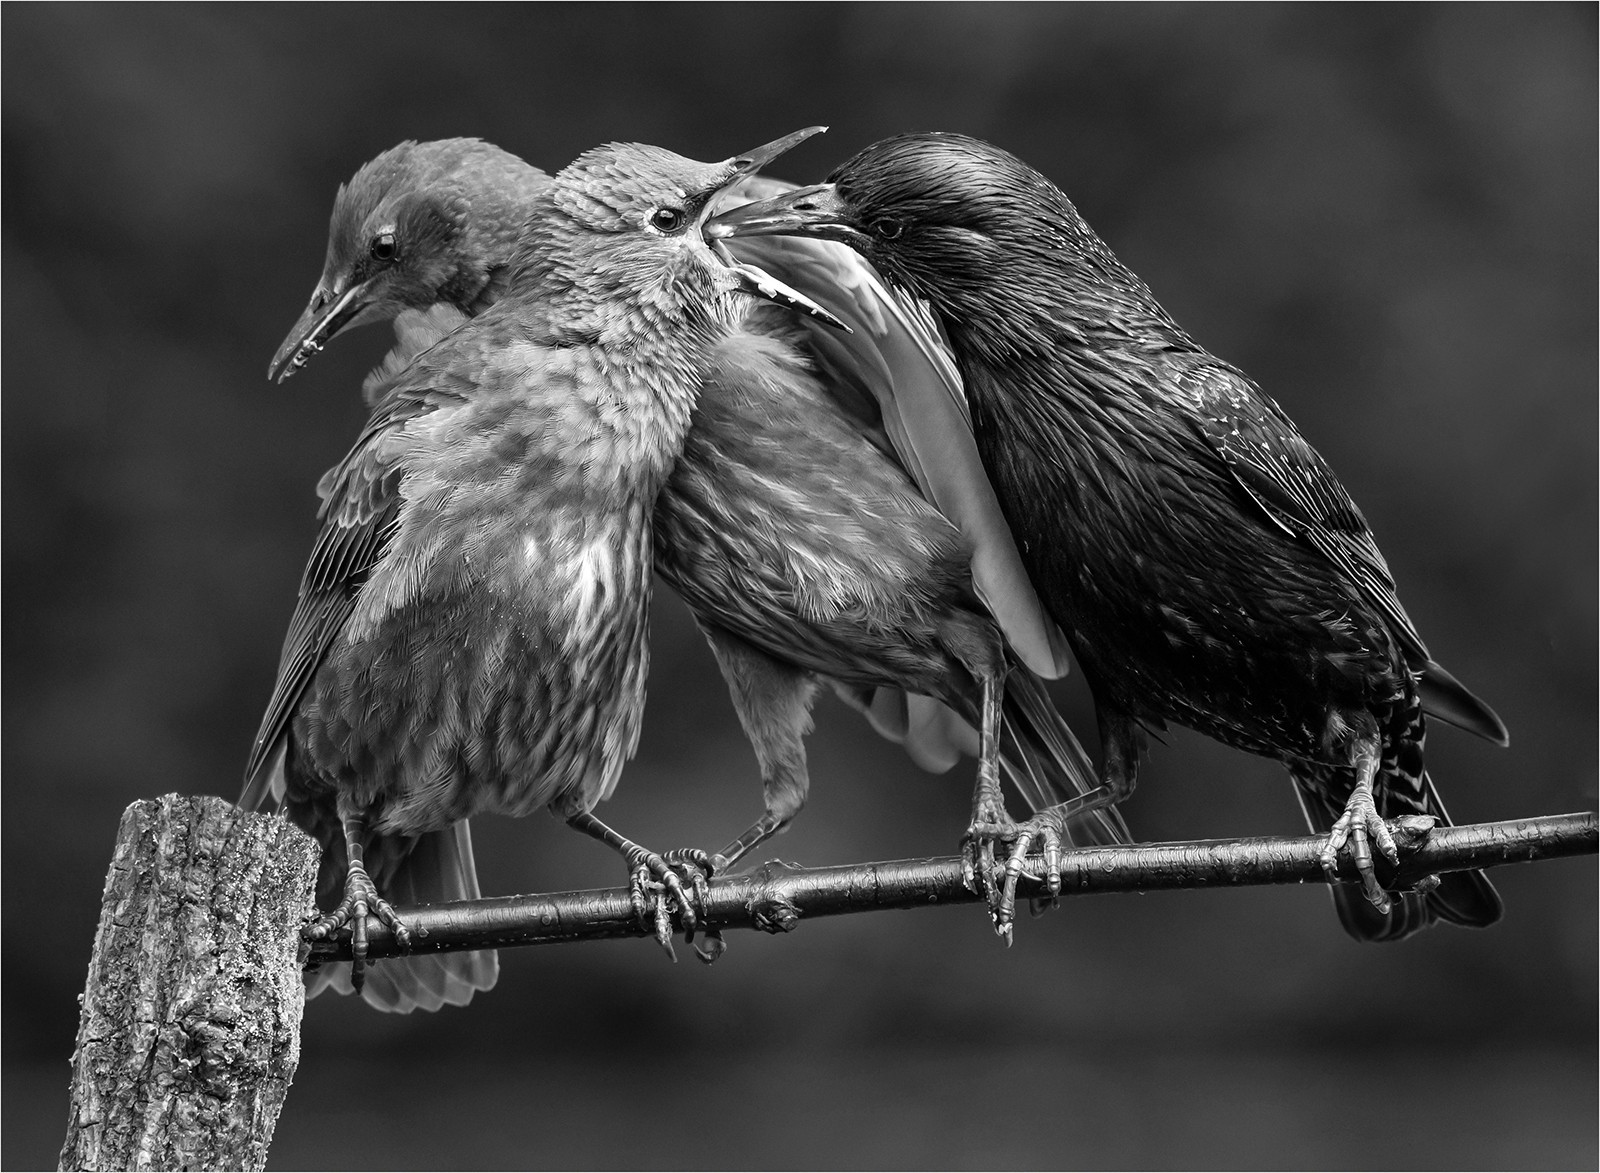 5.Starling  feeding young.